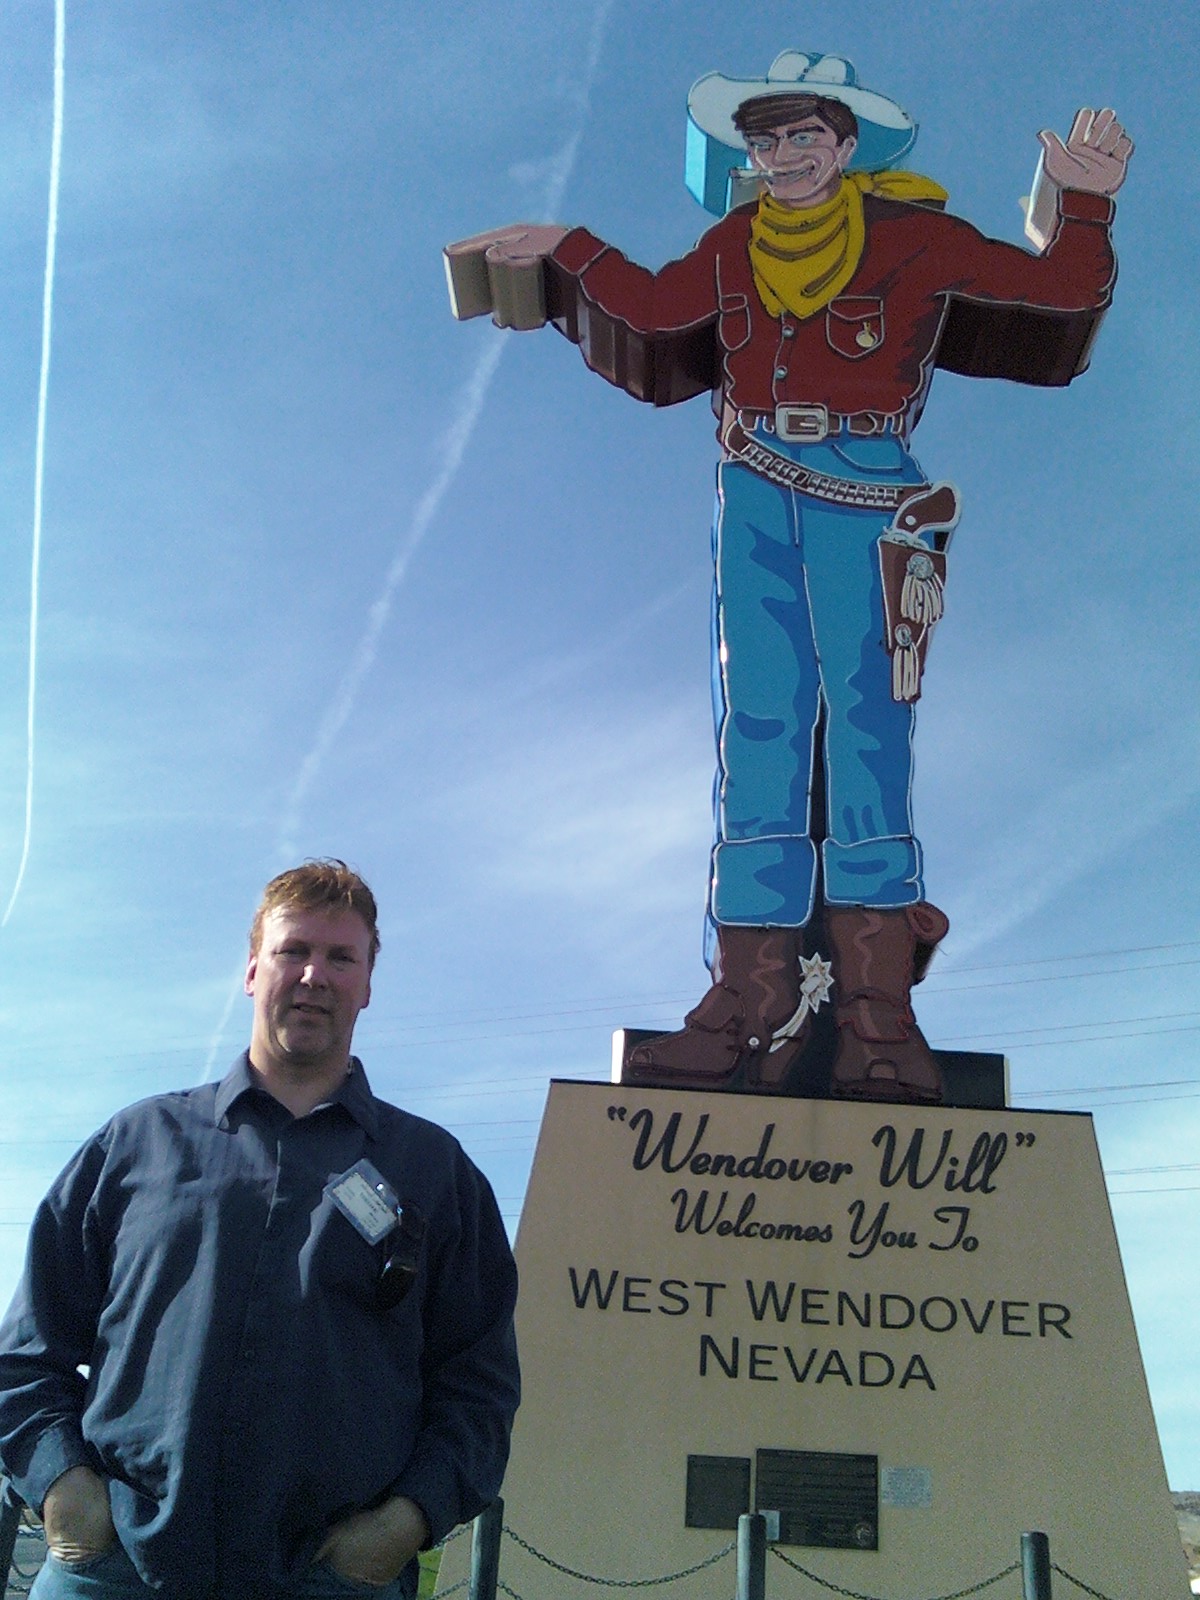 wendover Cowboy "Will" welcomes me.